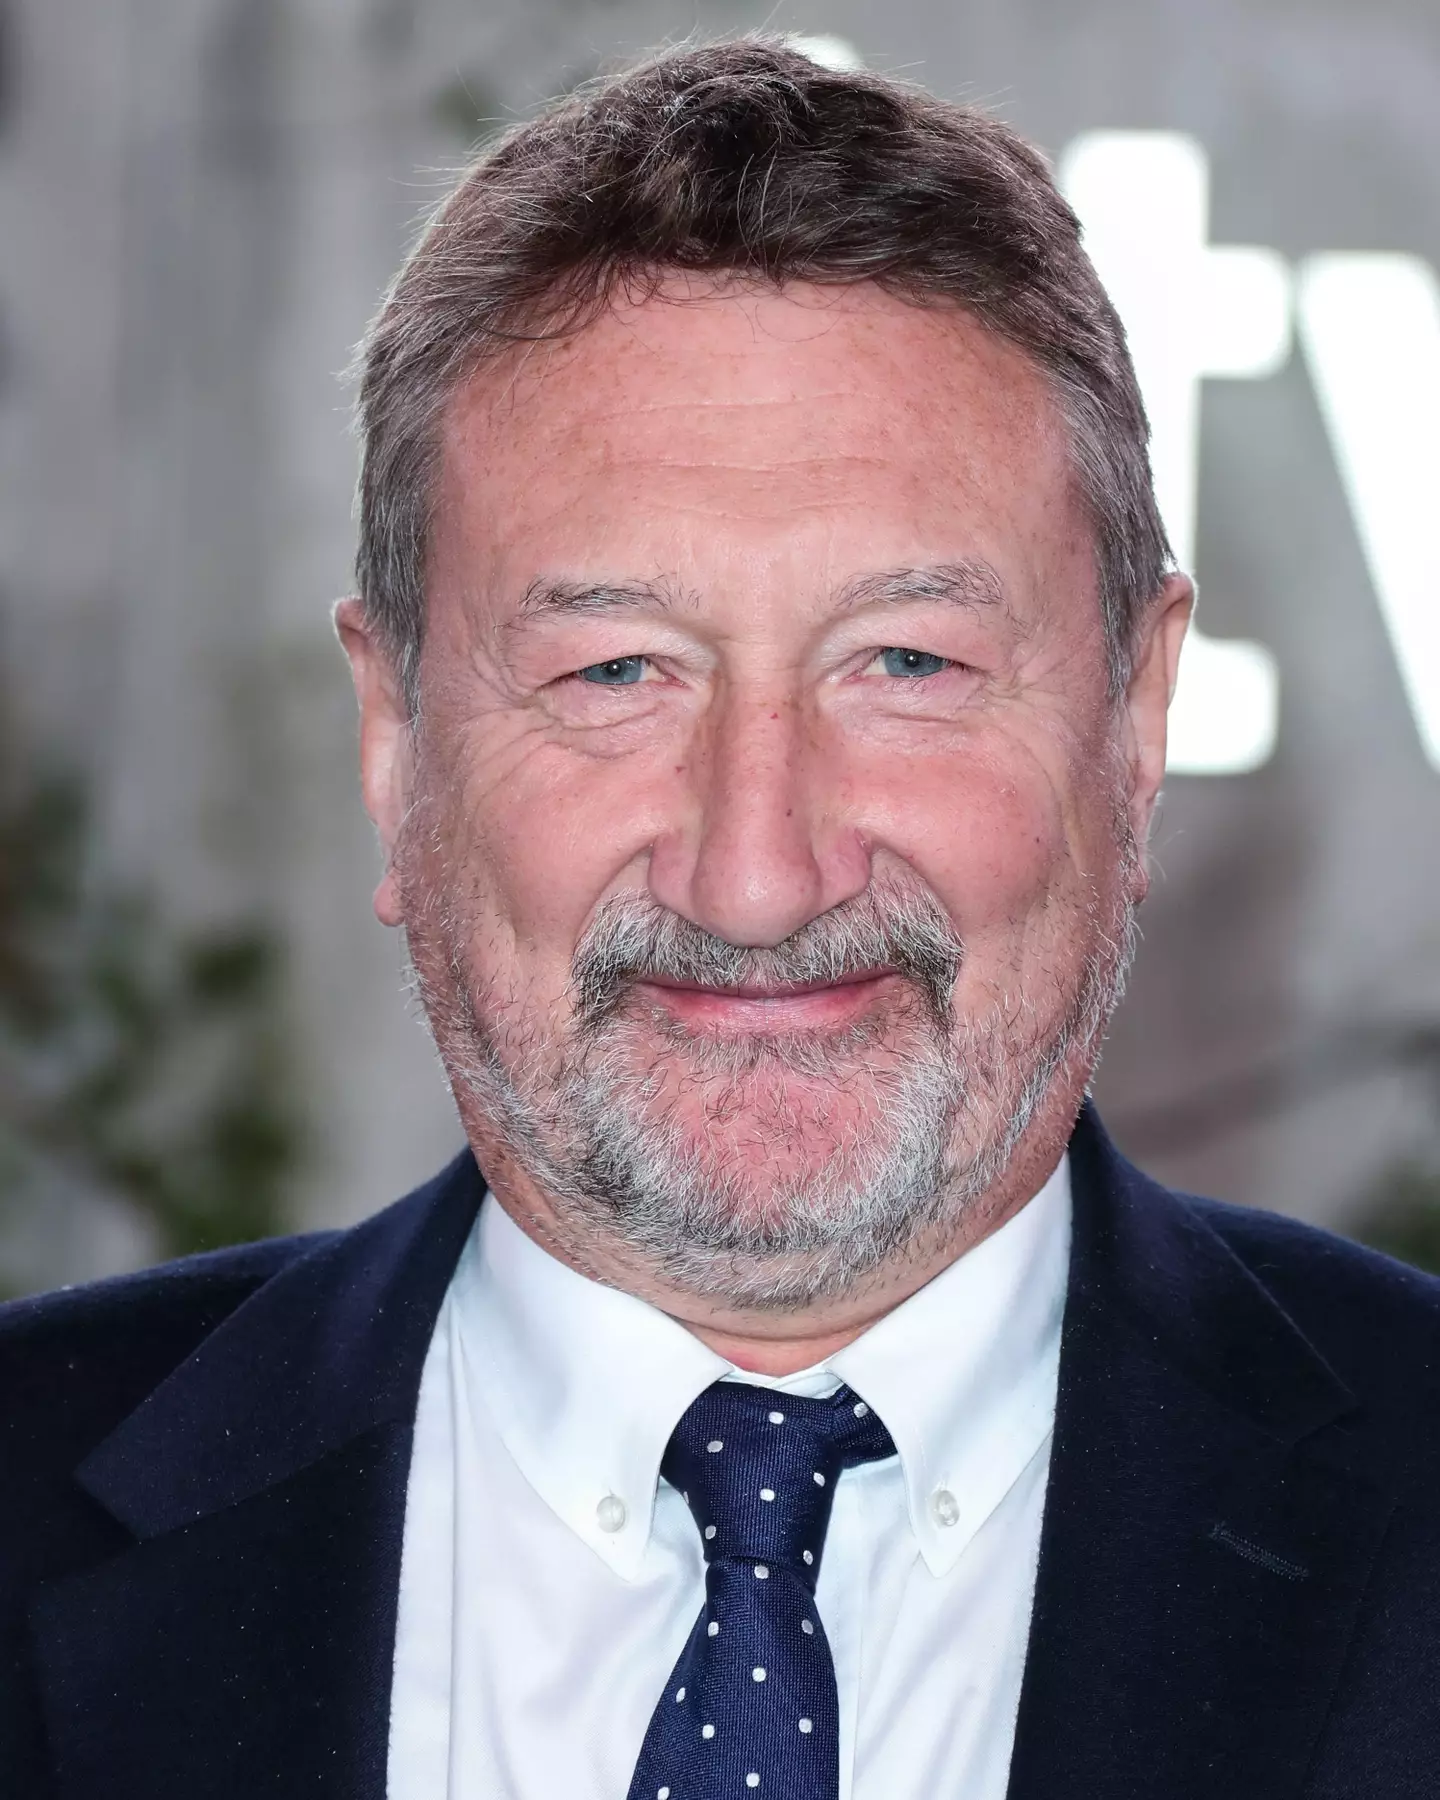 Steven Knight says the series is very close to his heart.